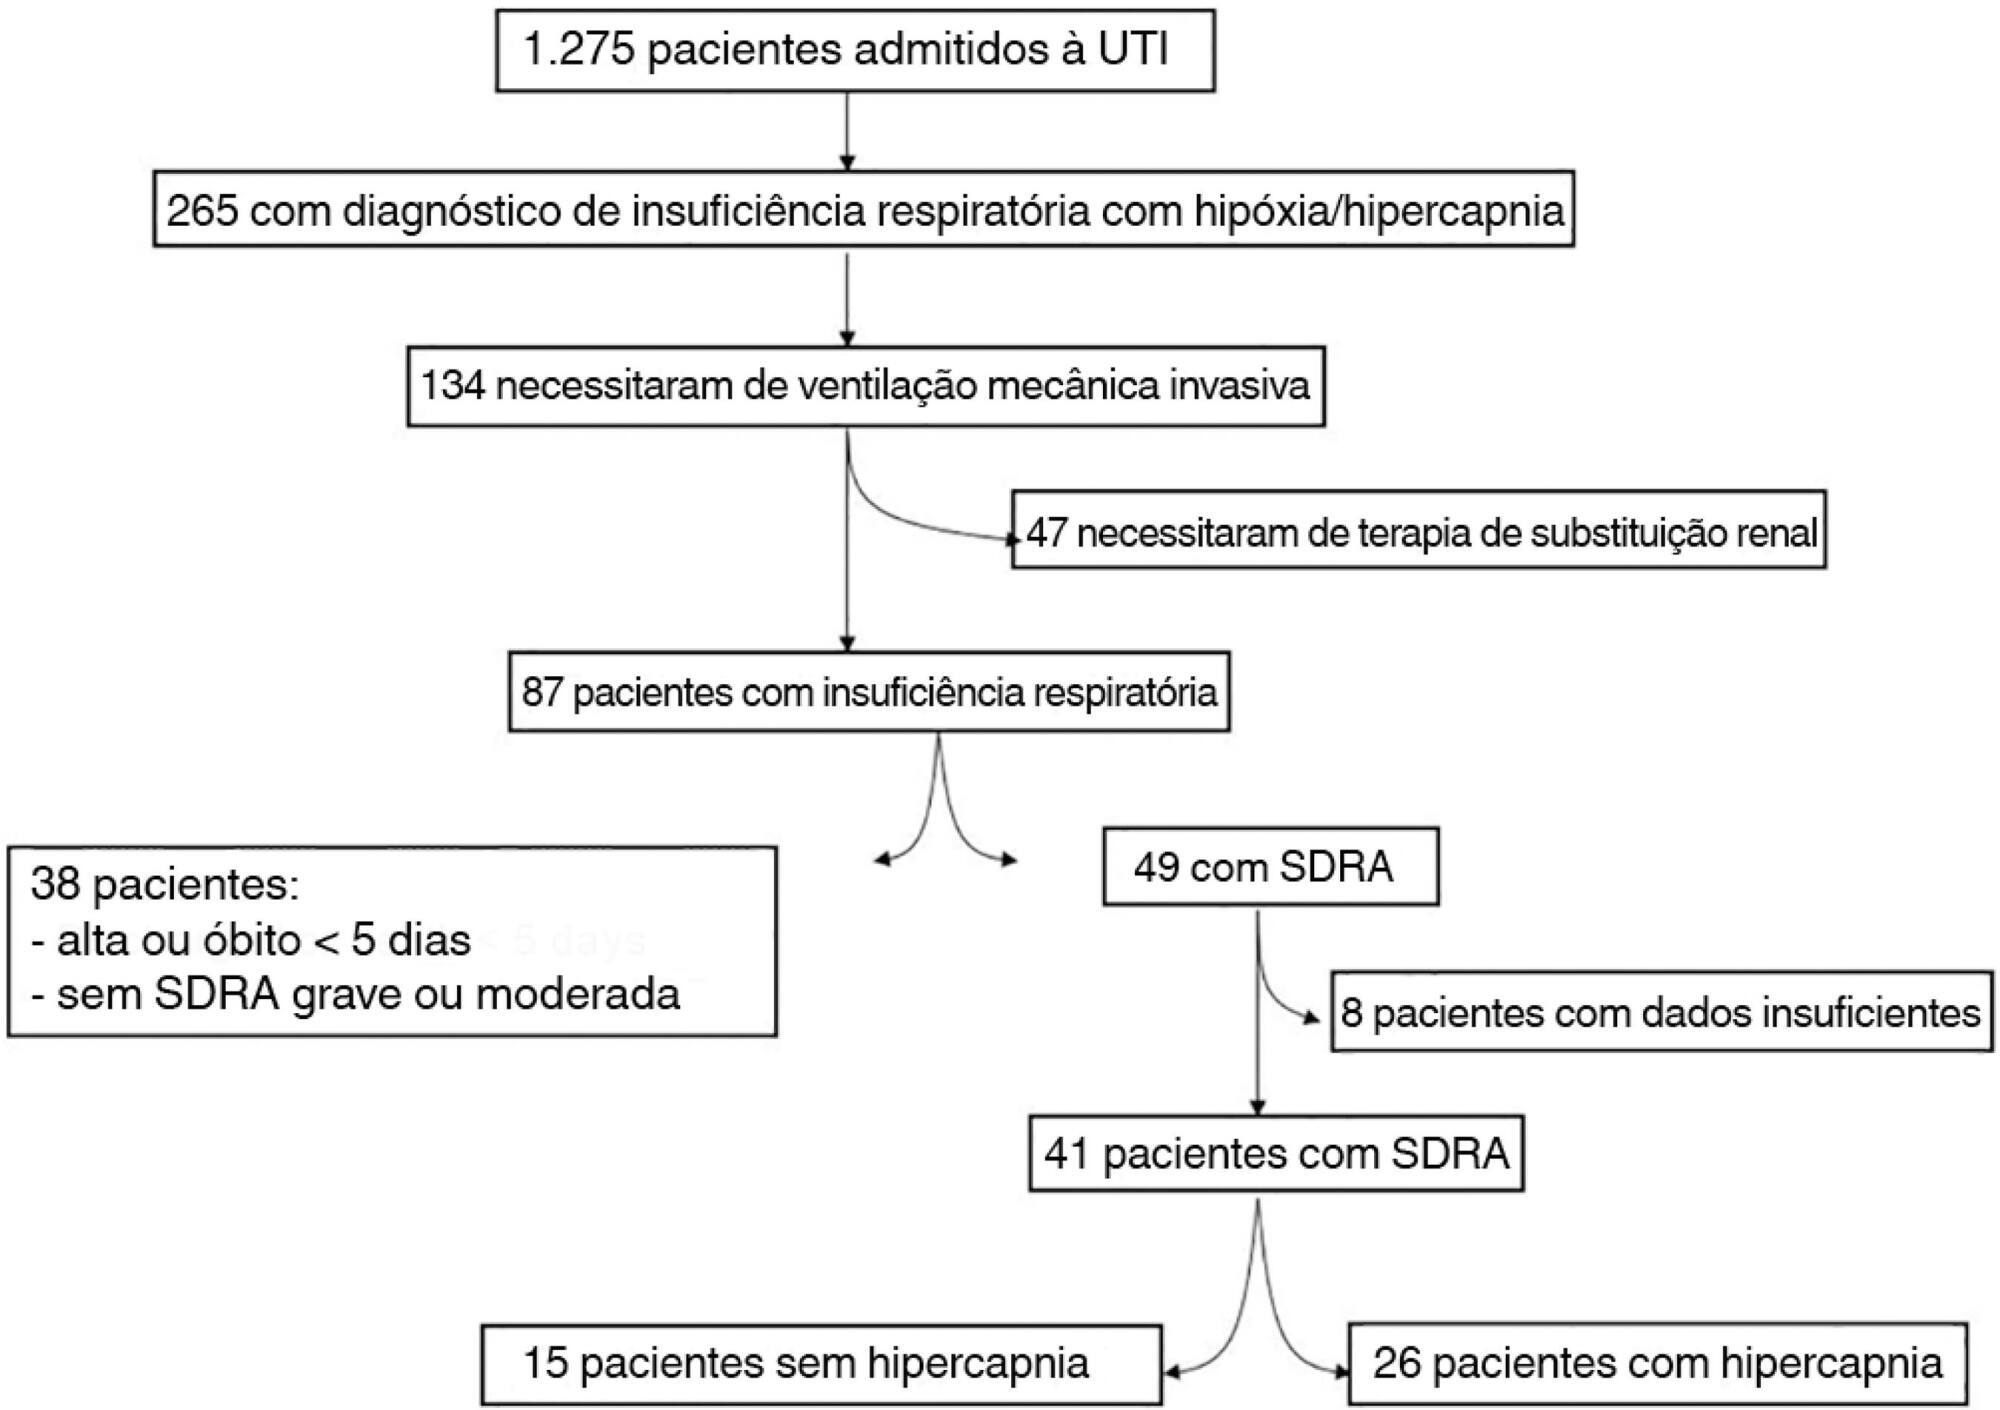 Metabolic acid-base adaptation triggered by acute persistent hypercapnia in mechanically ventilated patients with acute respiratory distress syndrome